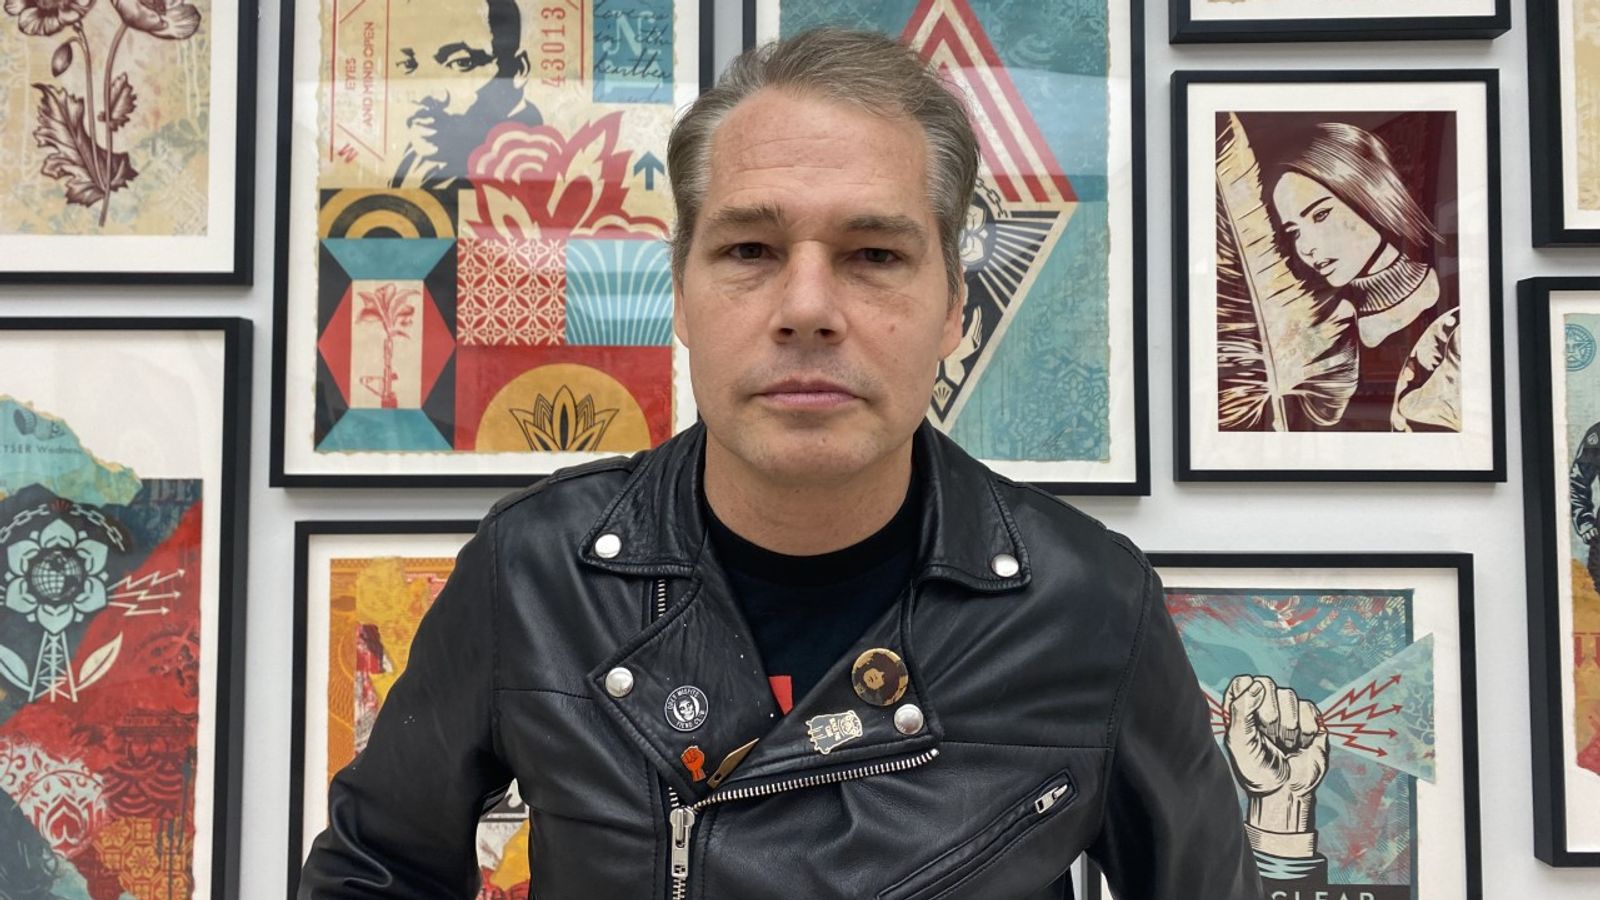 Shepard Fairey: Obama 'Hope' poster artist condemns 'cancel culture' as many are 'fearful about having opinion'